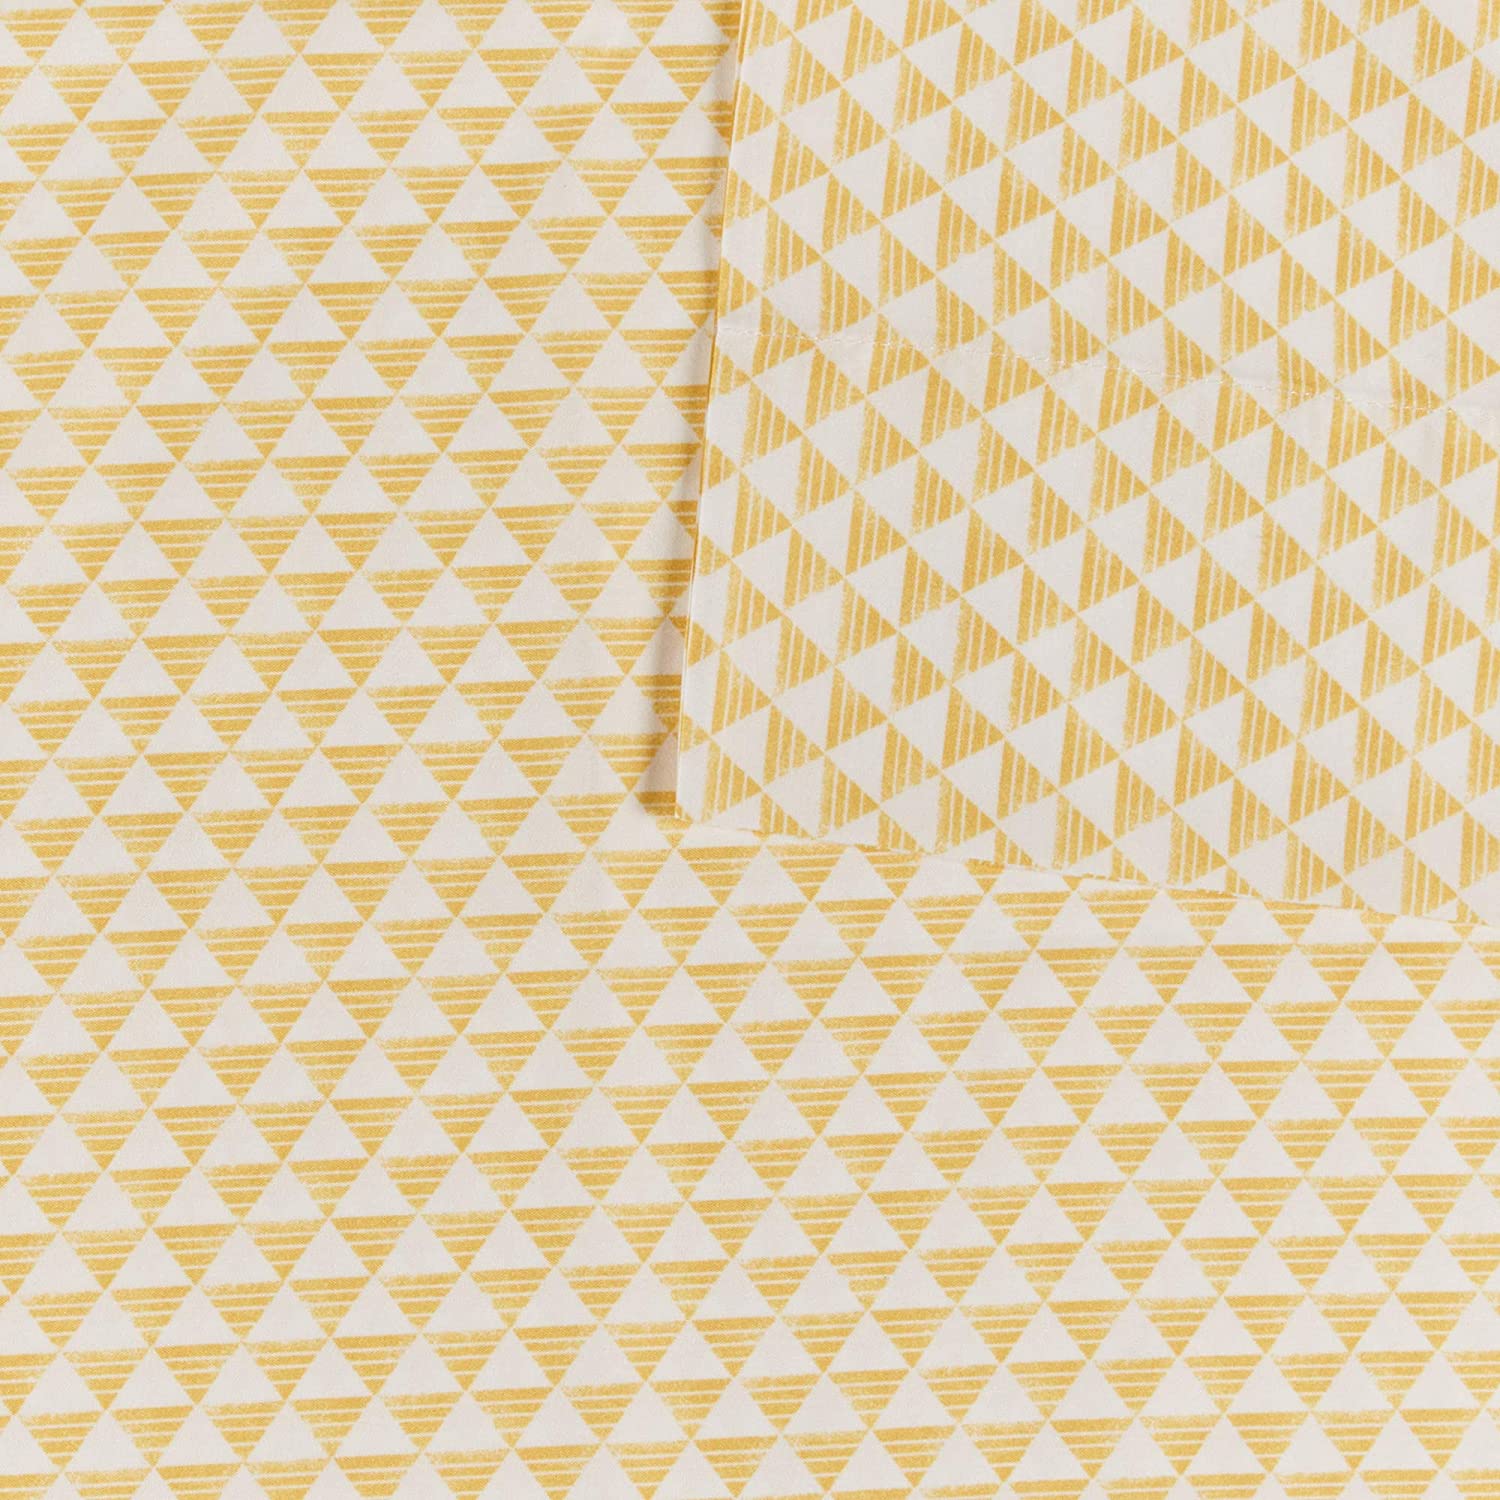 Intelligent Design Ultra Soft Wrinkle Free All Seasons Year Round, Full, Triangle Yellow